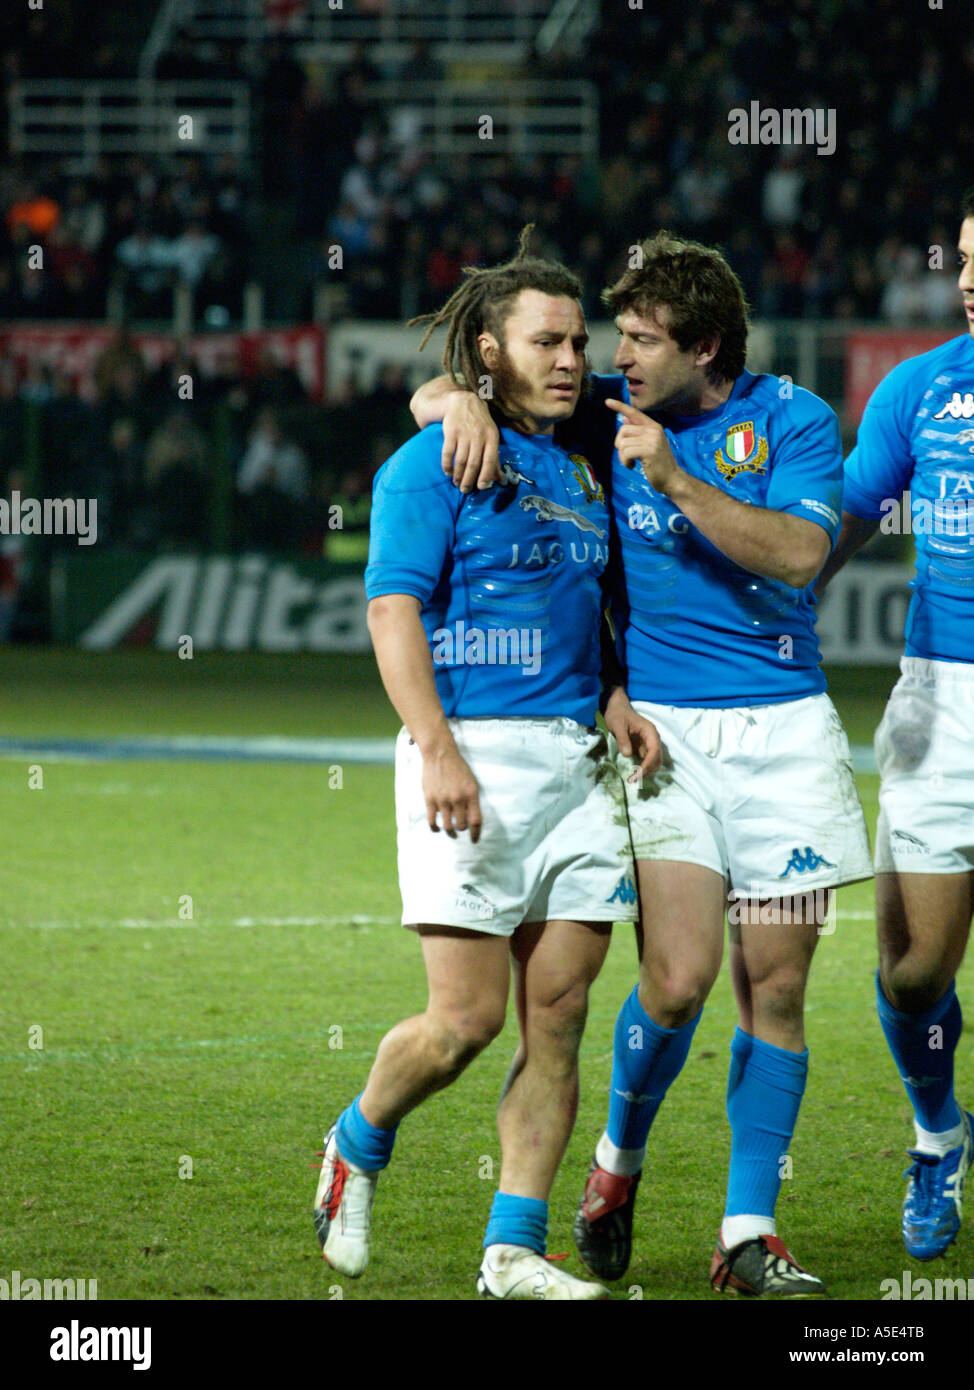 Italy s Paul Griffen gets told to calm down by team mate Aaron Persico Stock Photo